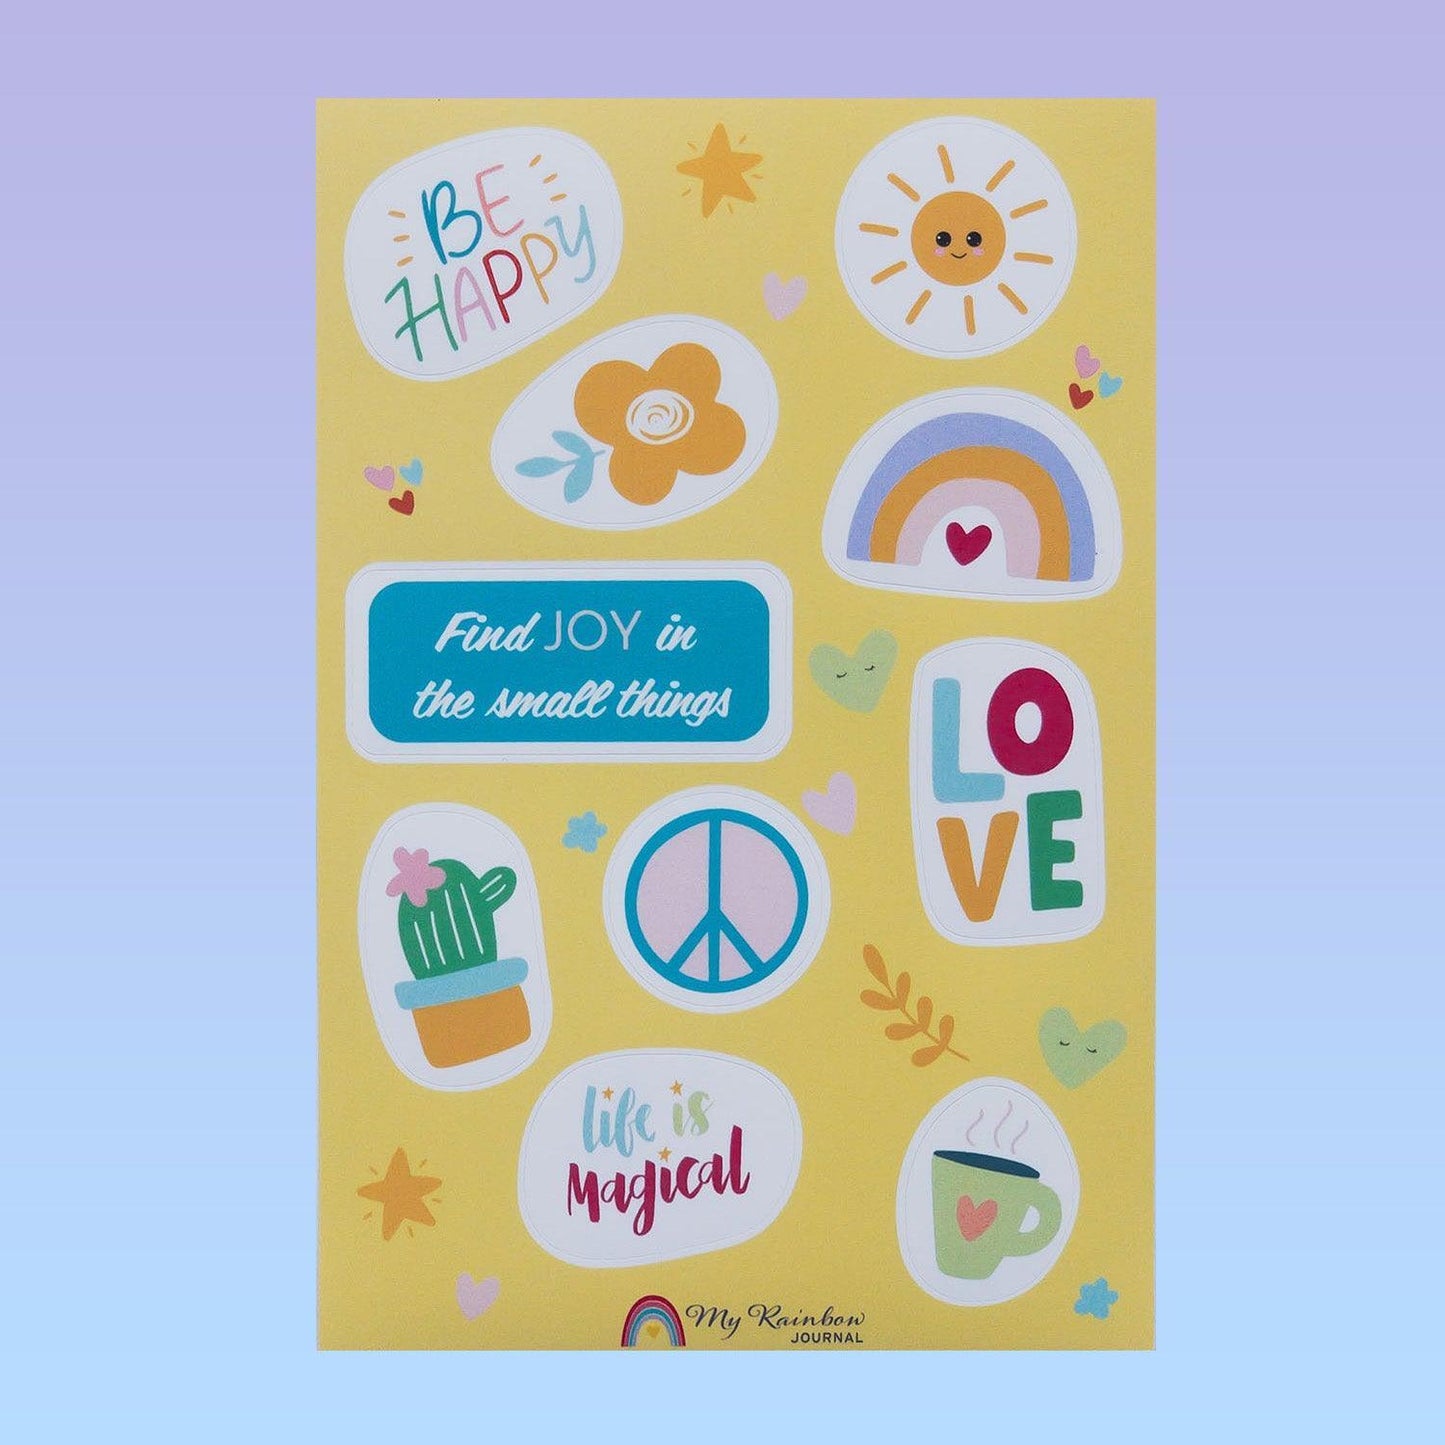 Happiness Sticker Sheet features stickers that will make you smile set against a yellow background.